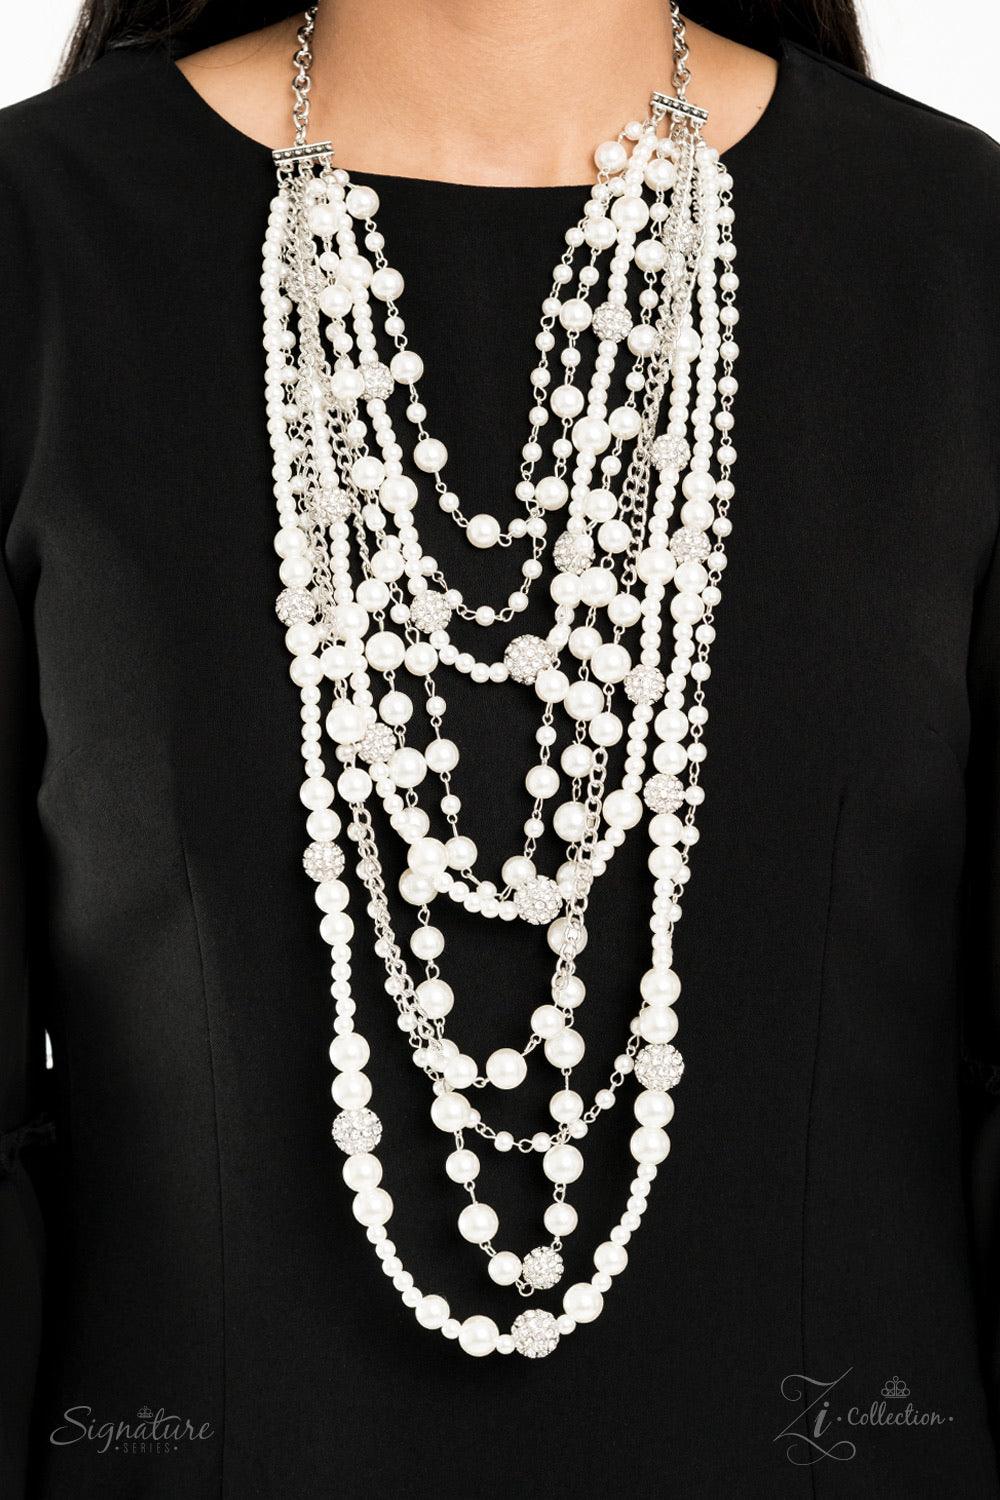 Paparazzi Accessories The LeCricia 💗💗ZiCollection $25💗💗 An elegant collection of timeless white pearls, shiny sections of silver chain, and bedazzling white rhinestone encrusted silver beads effortlessly cascade down the chest. The vintage inspired la